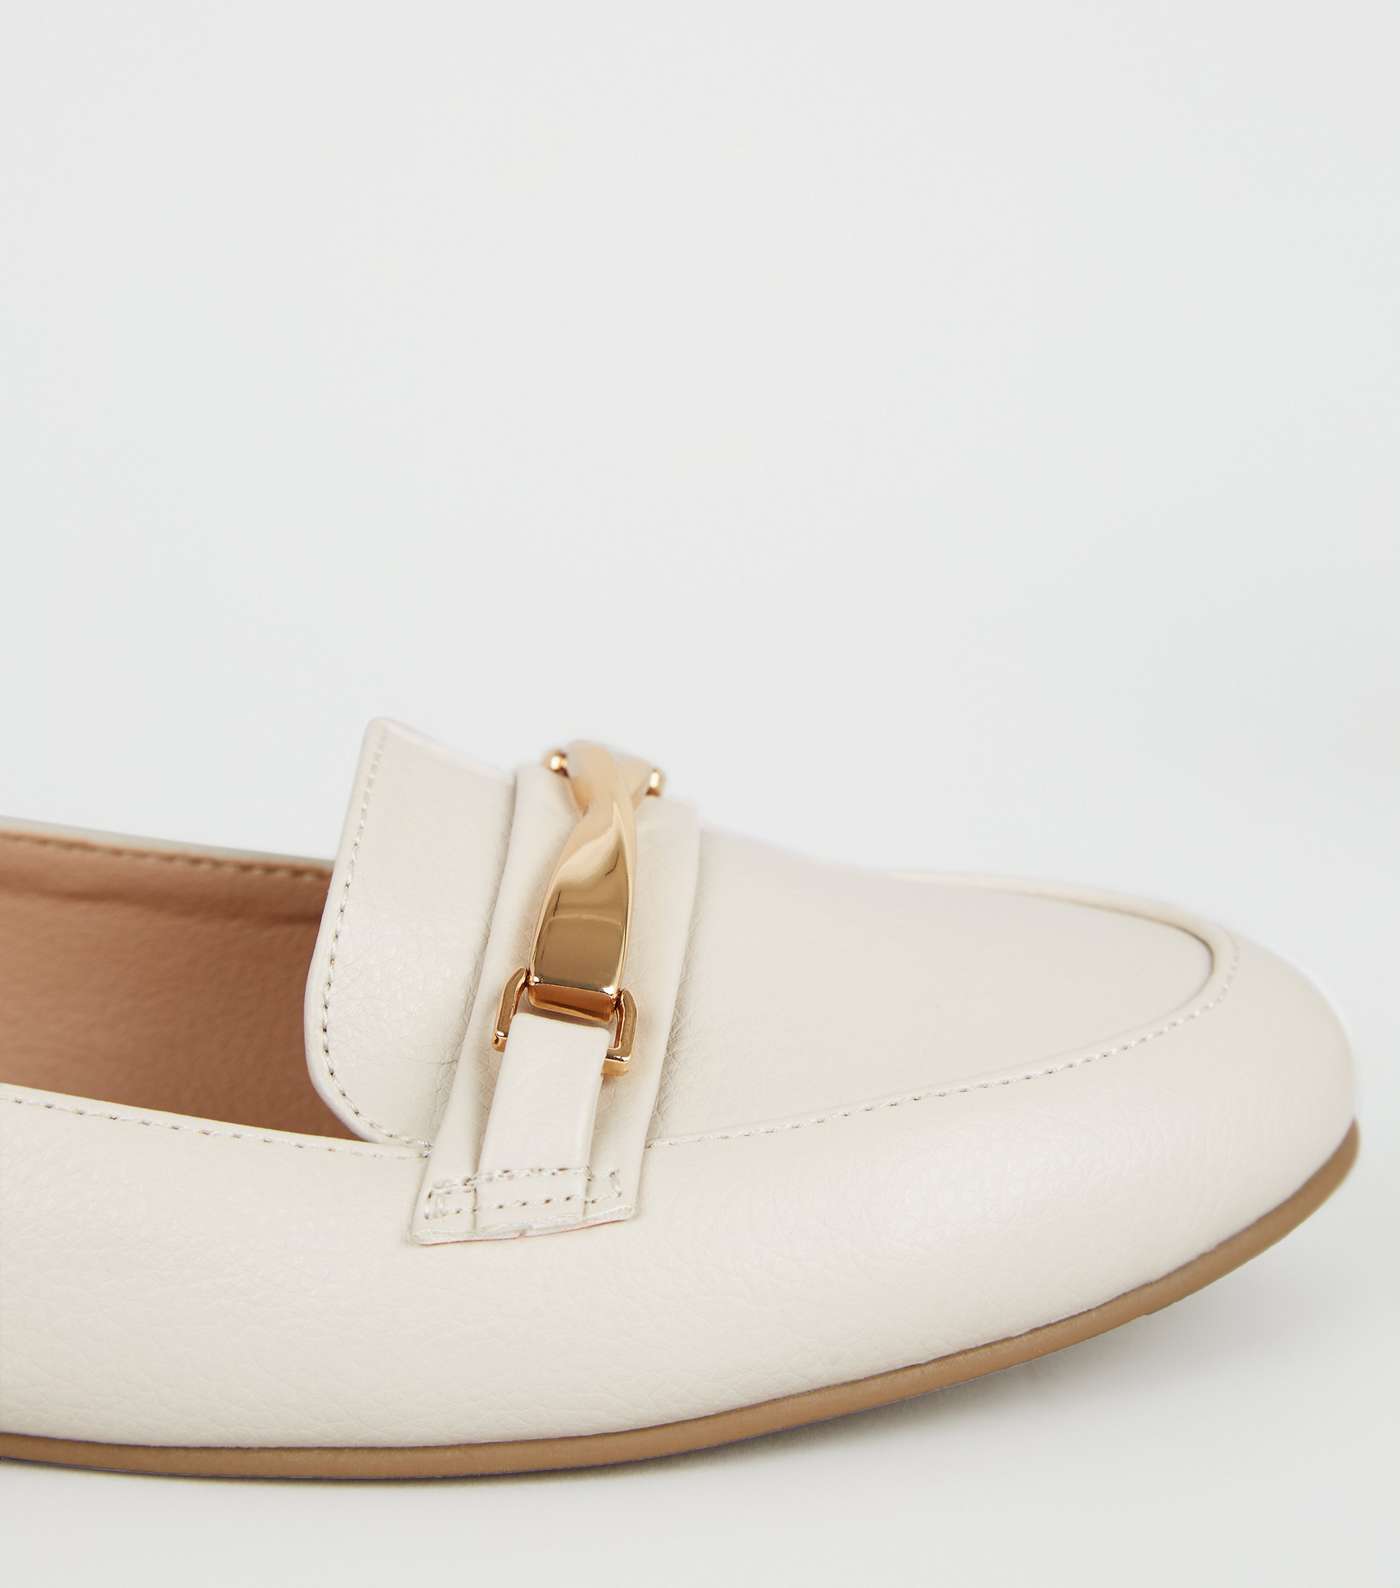 Off White Leather-Look Twist Bar Loafers Image 4